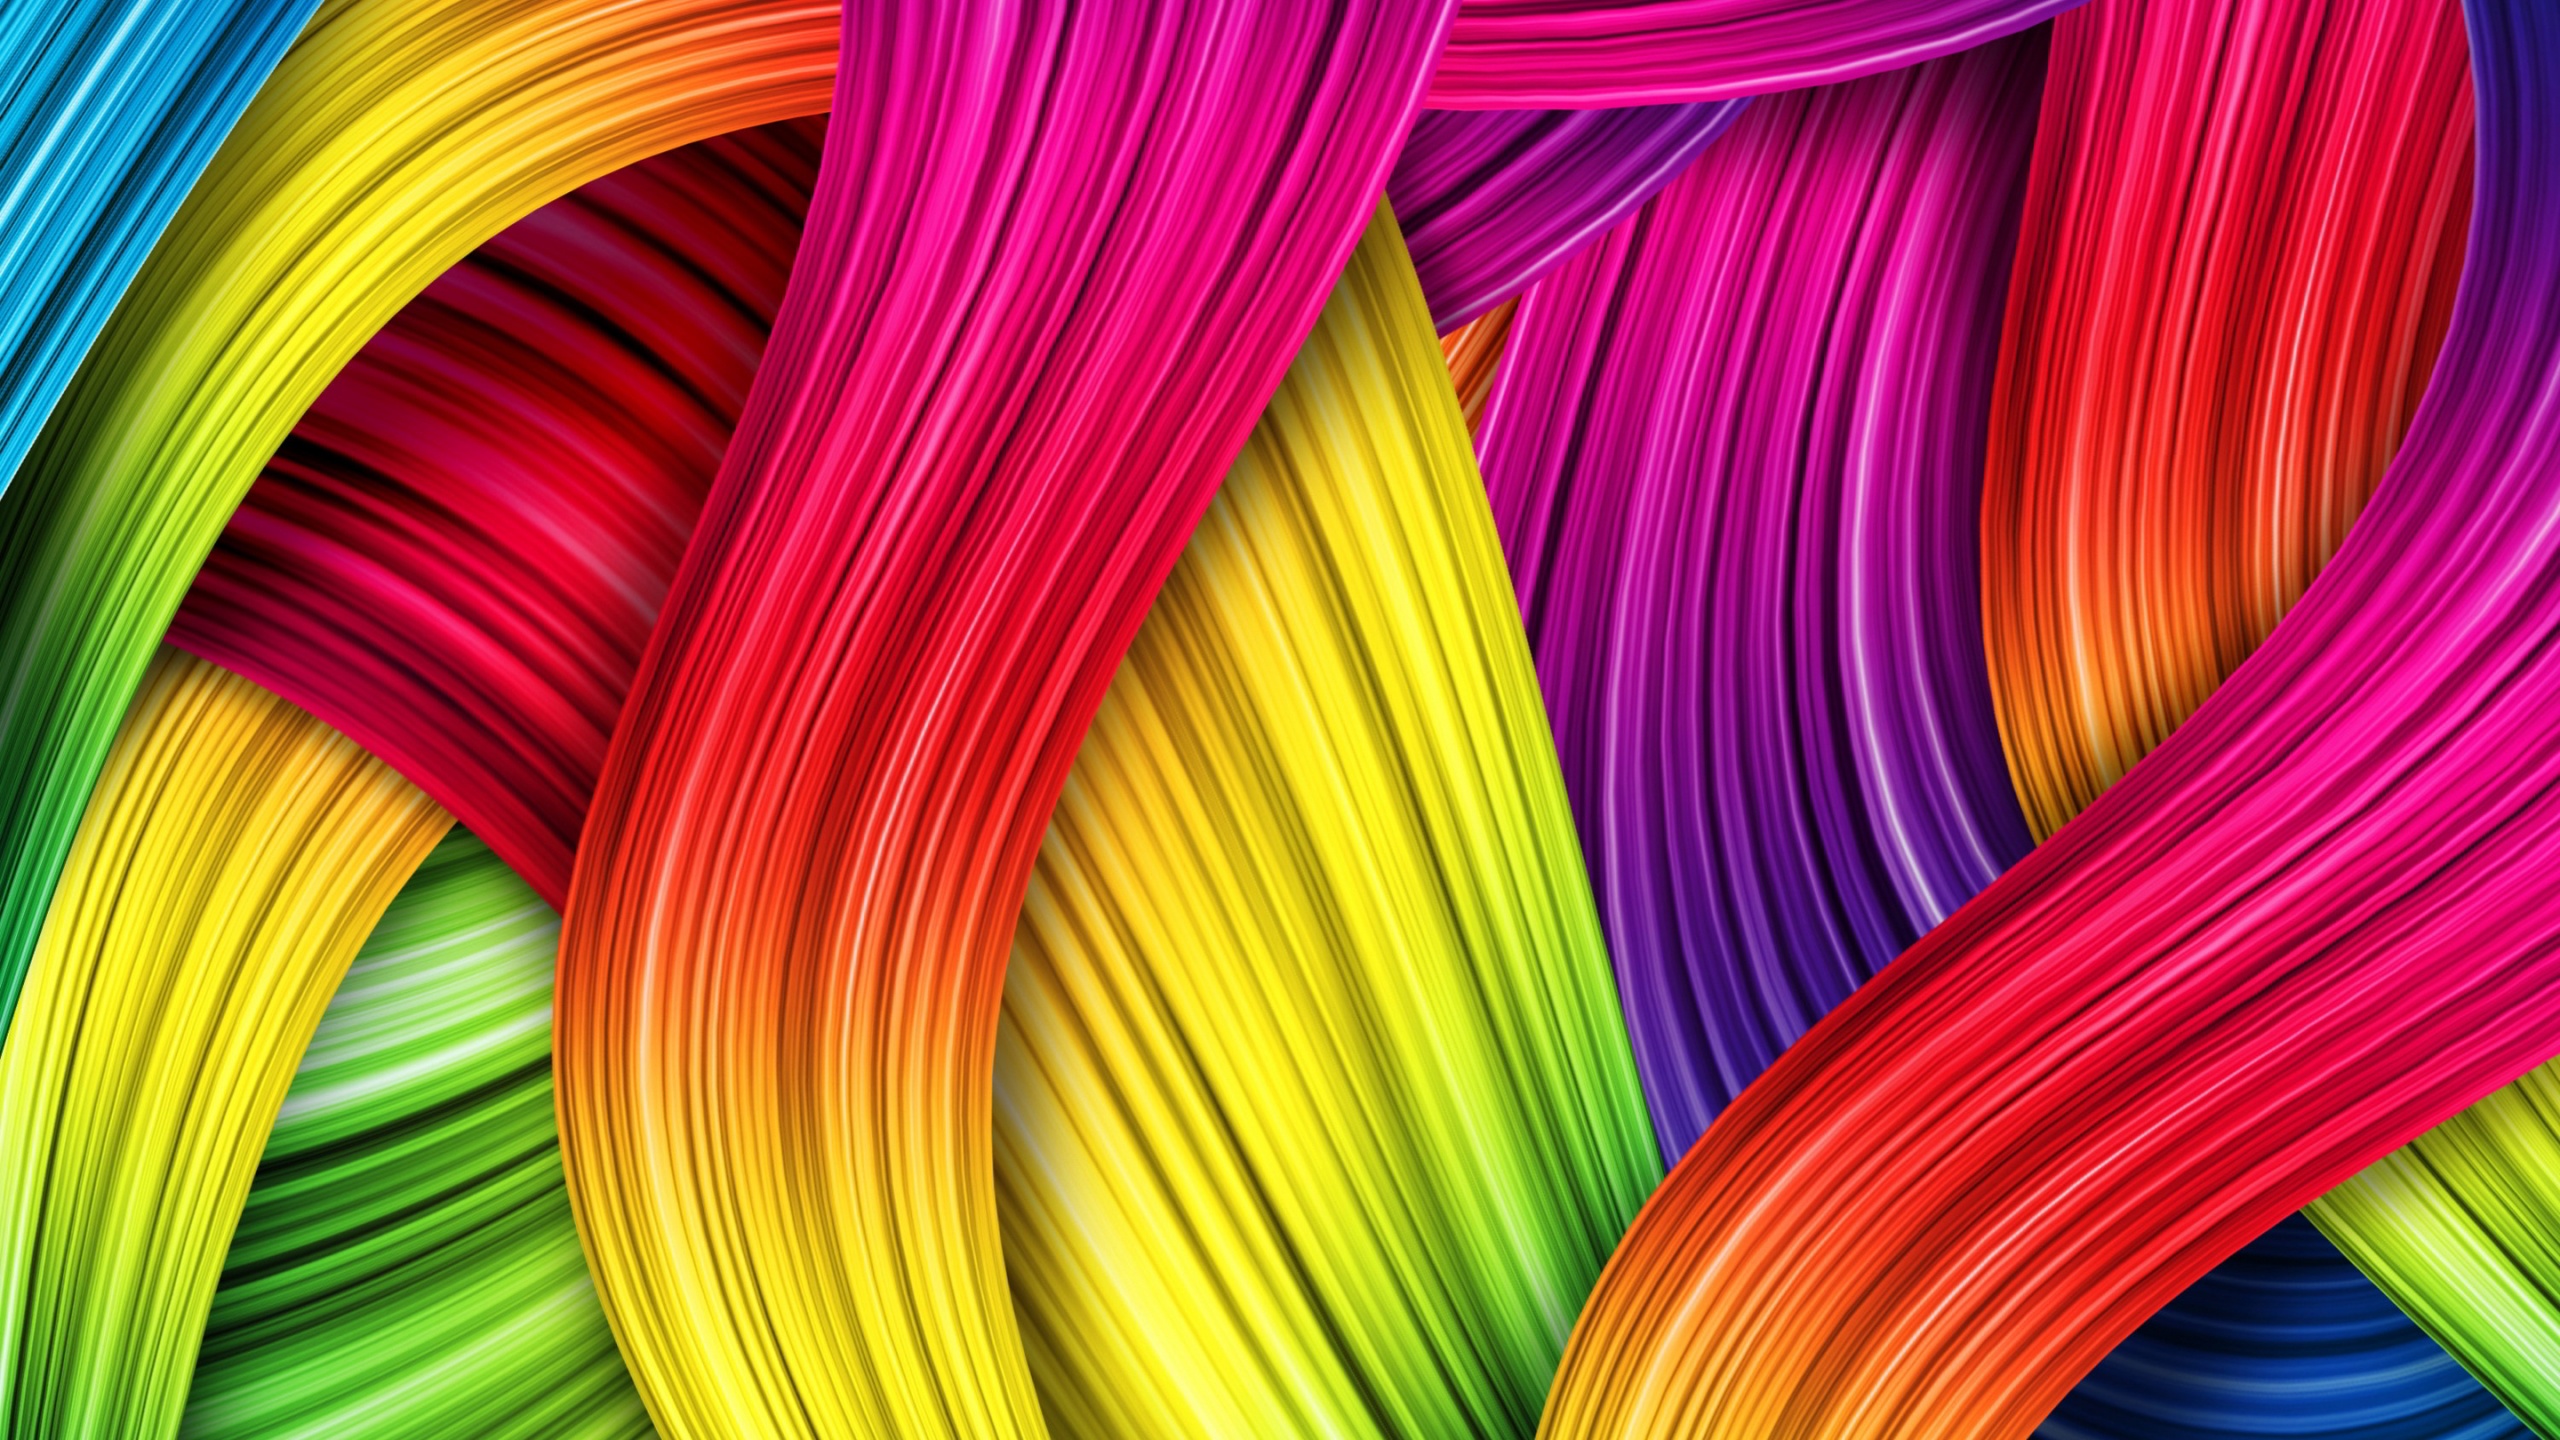 Colorful Abstract Wallpapers and Backgrounds 4739 High Resolution